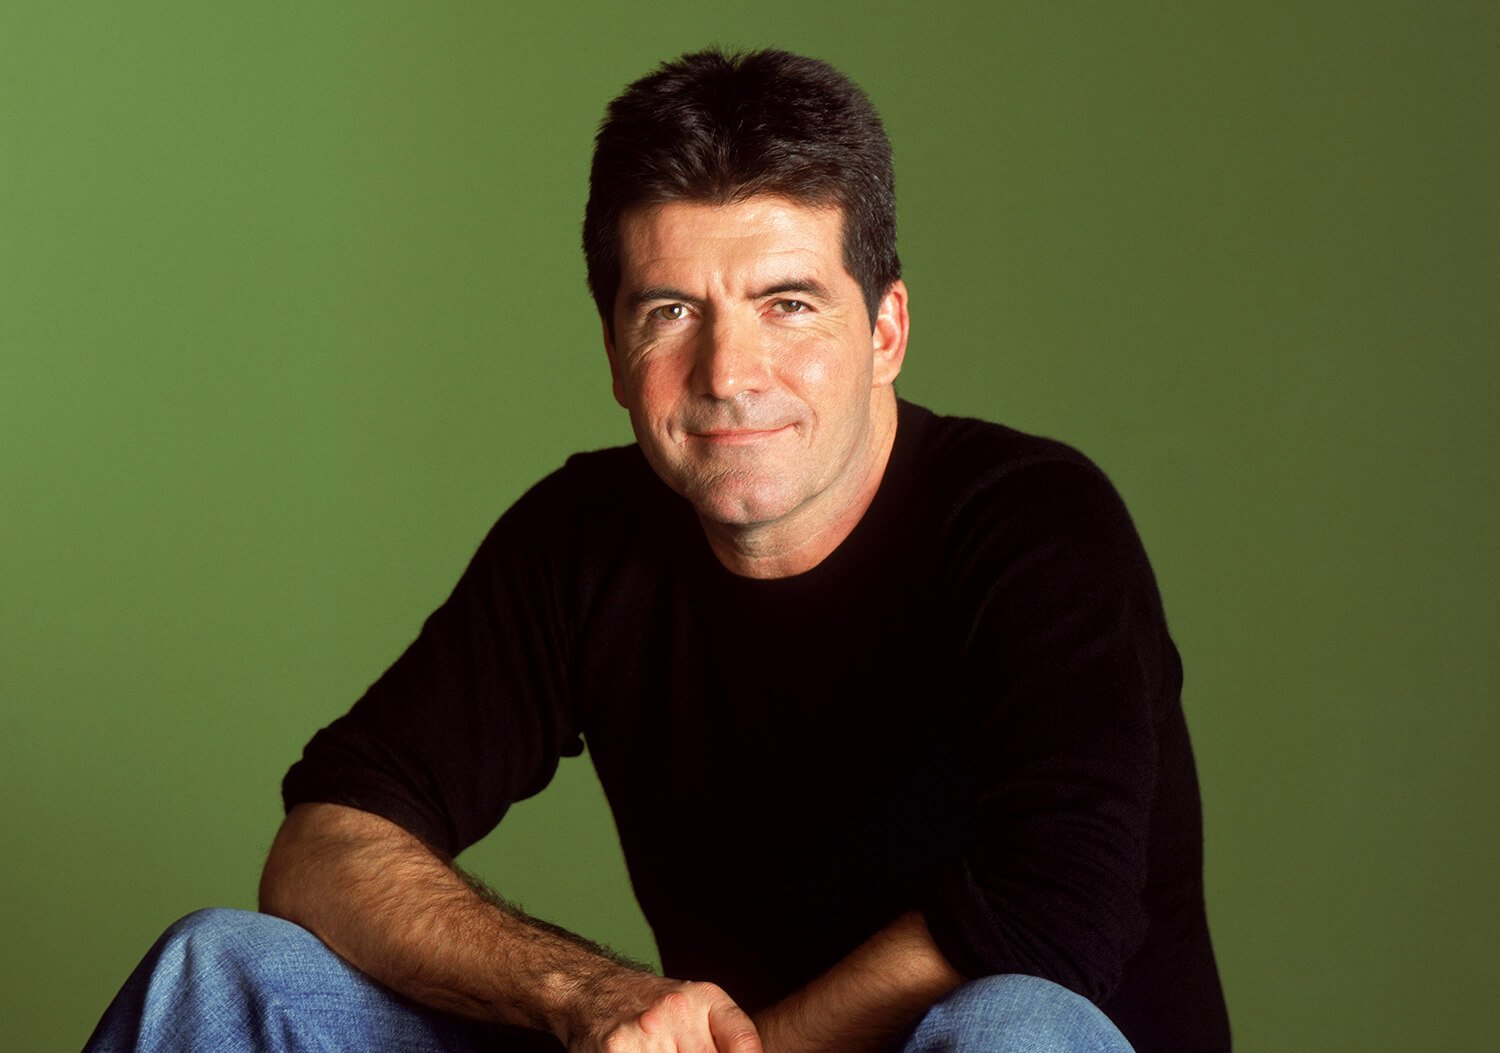 Former American Idol judge Simon Cowell poses against a green backdrop